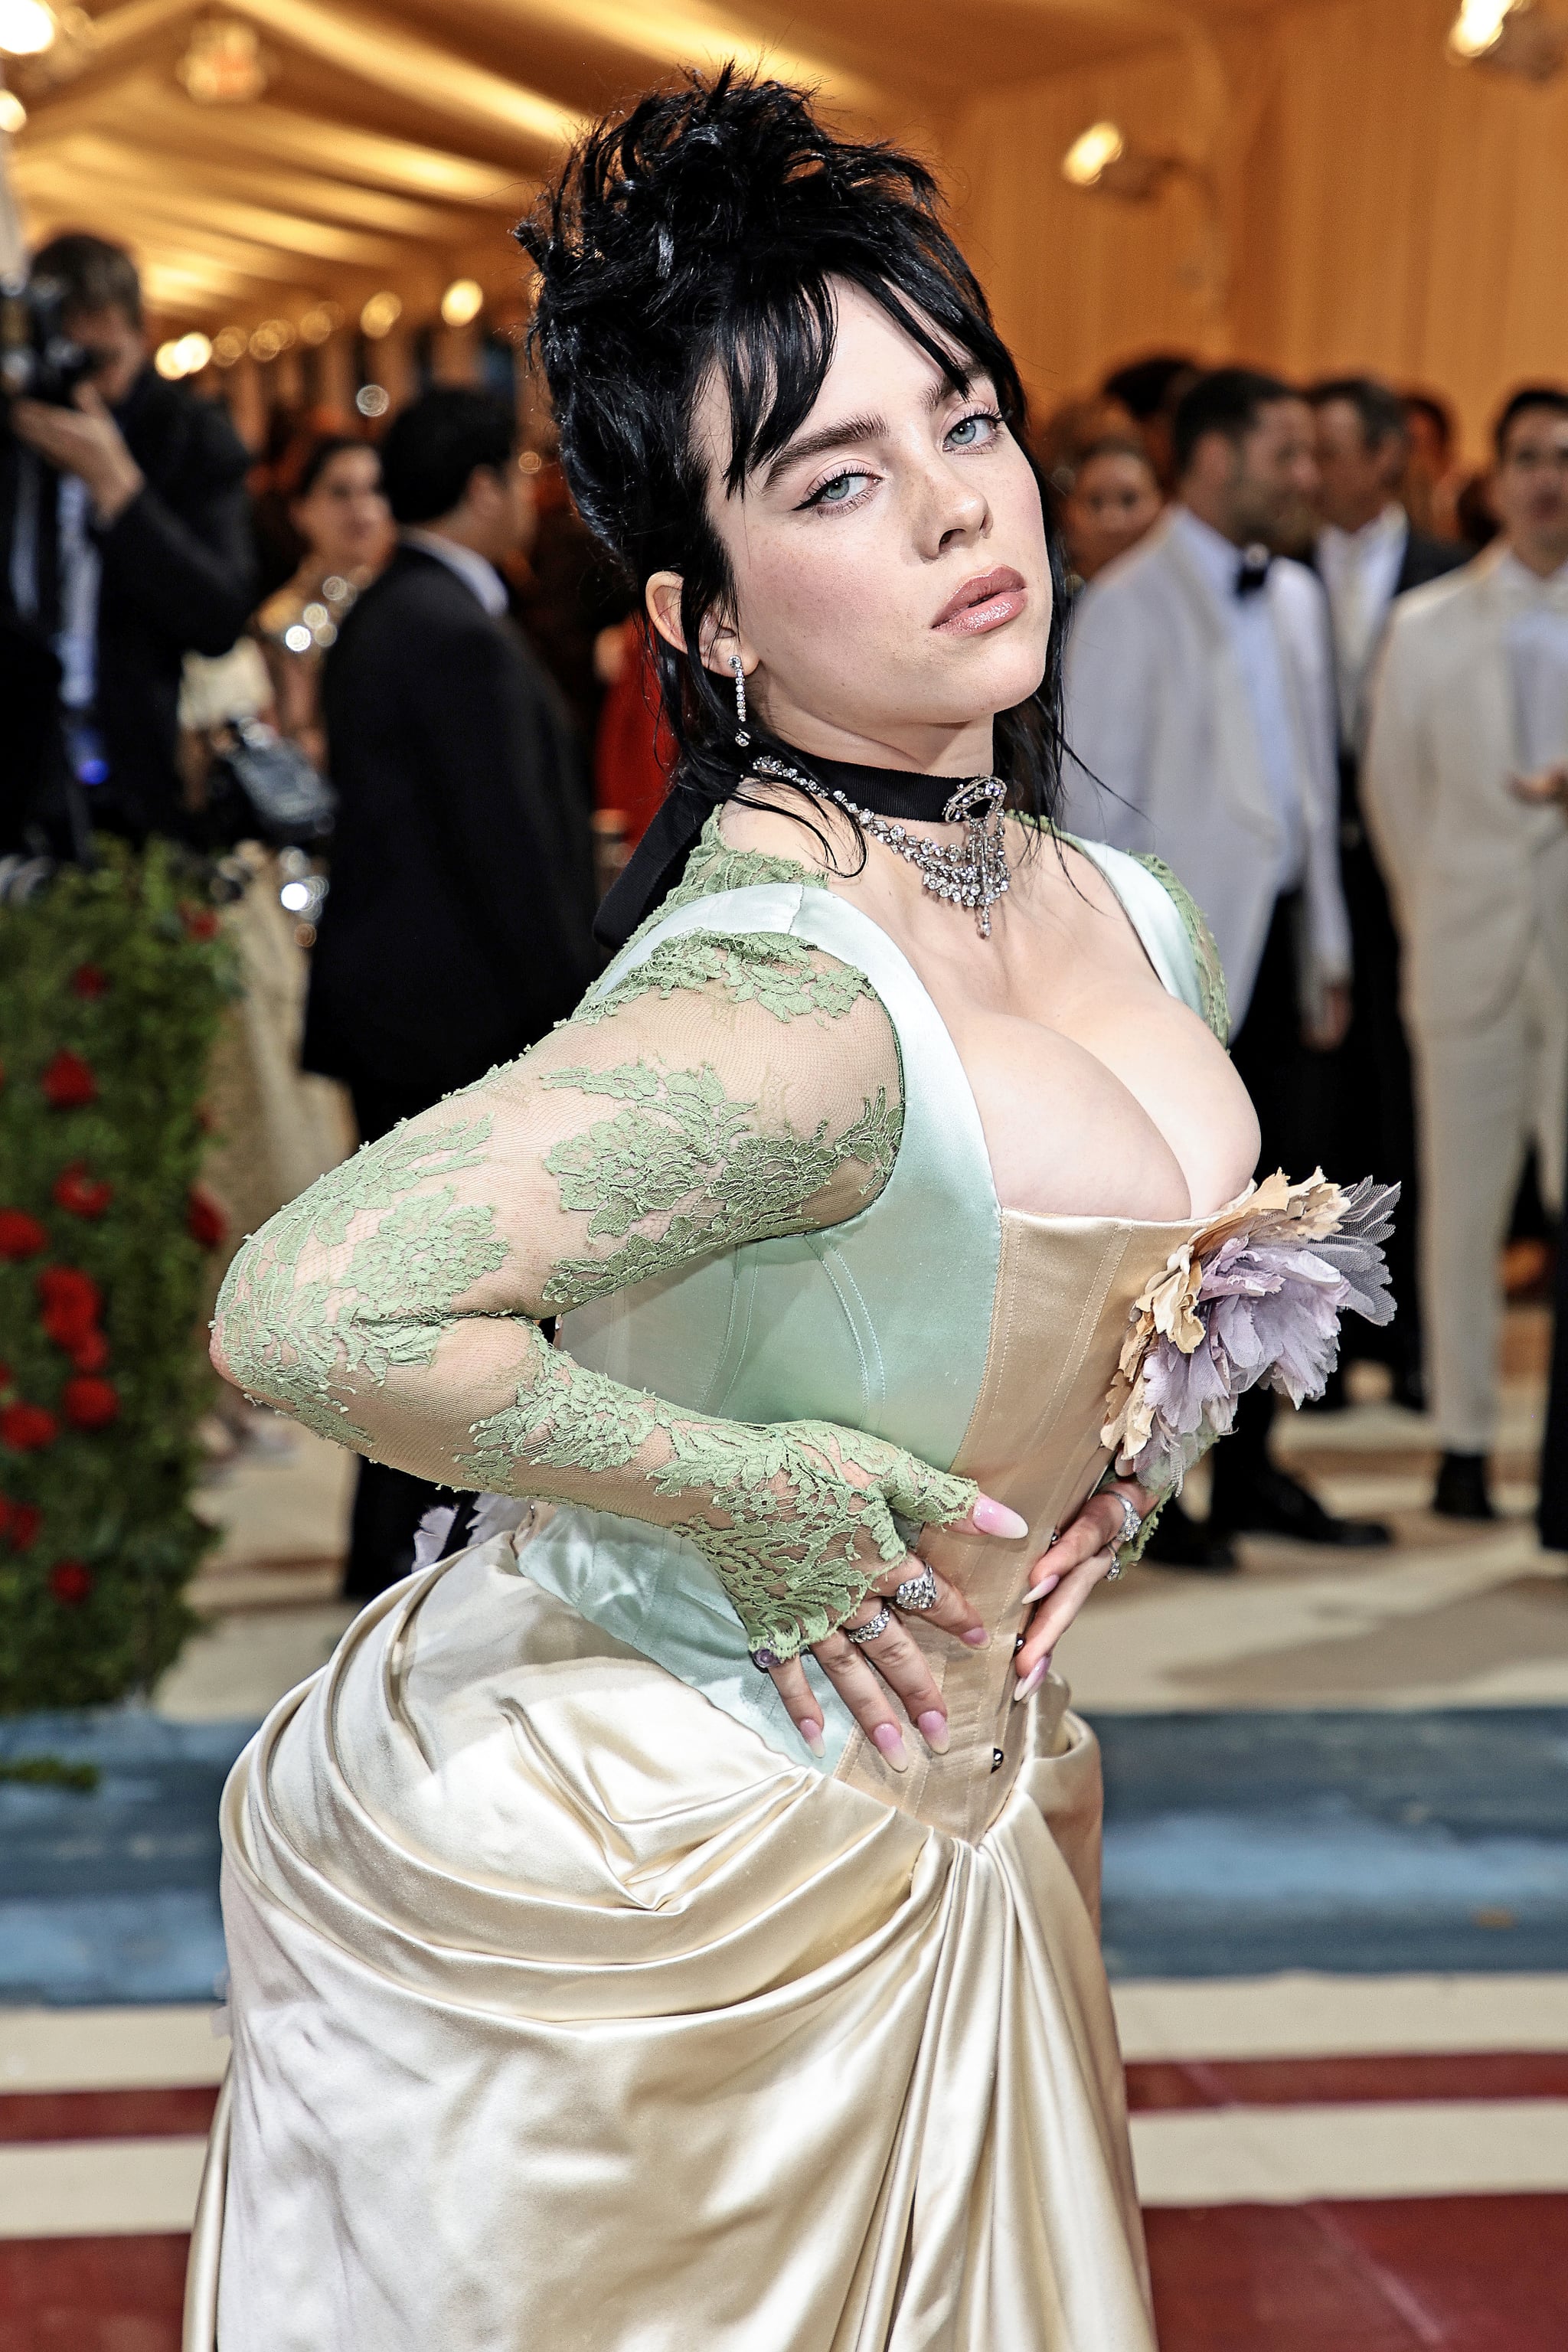 Billie Eilish Wore The Tightest Corset to the Met Gala 2022 — See